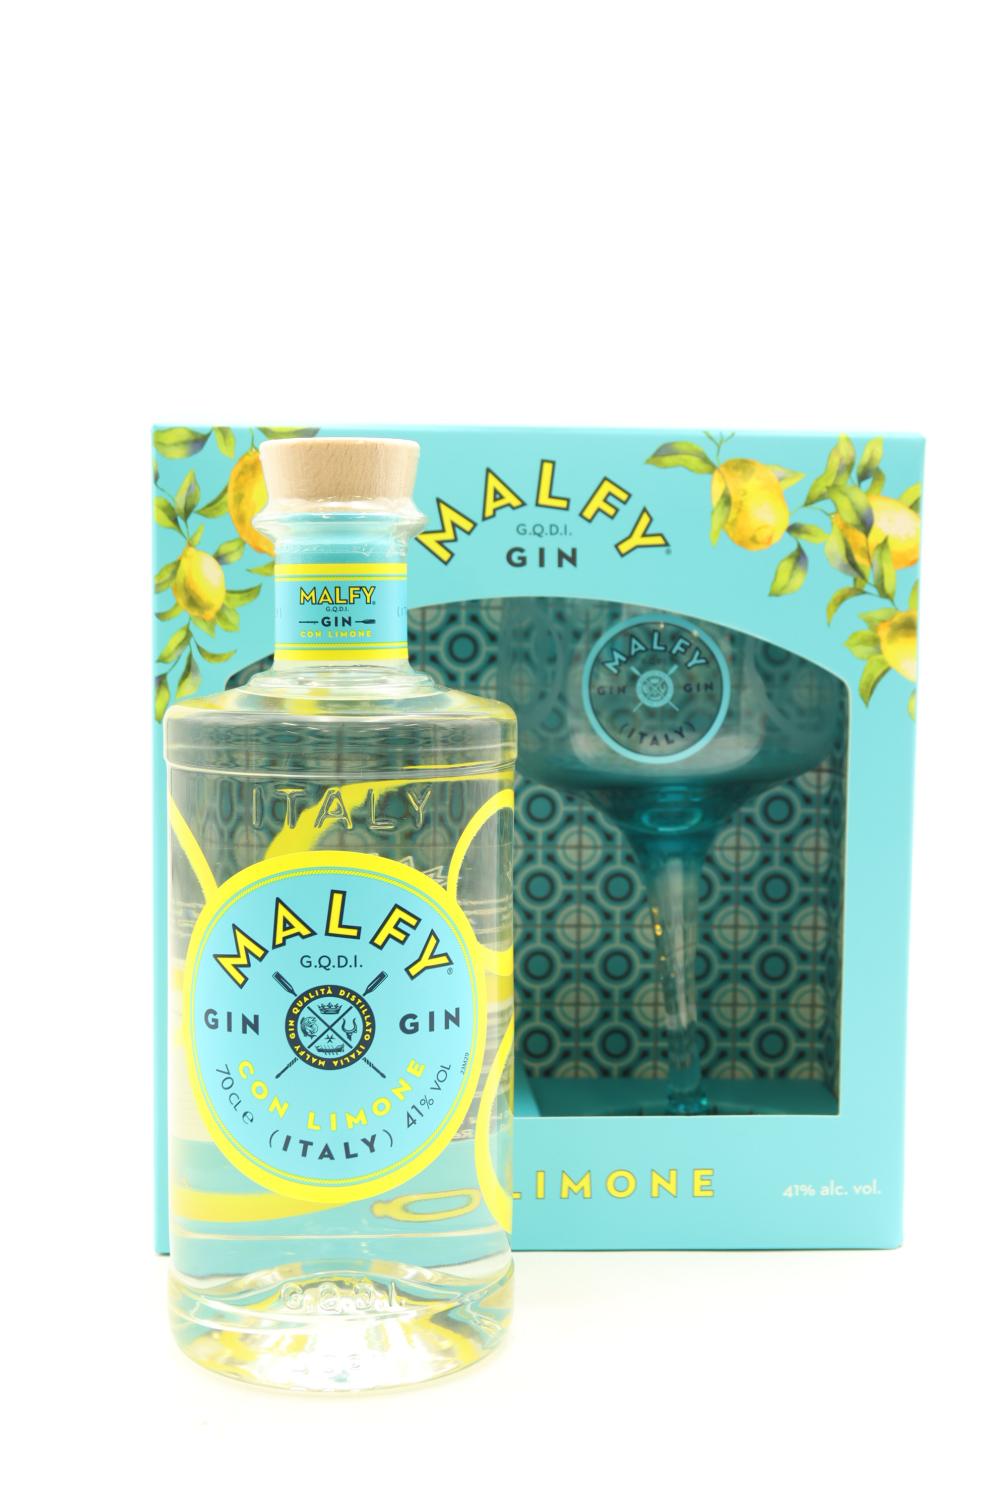 1) Malfy Con Limone Gin, 41% (GB) Gin ABV a With Glass